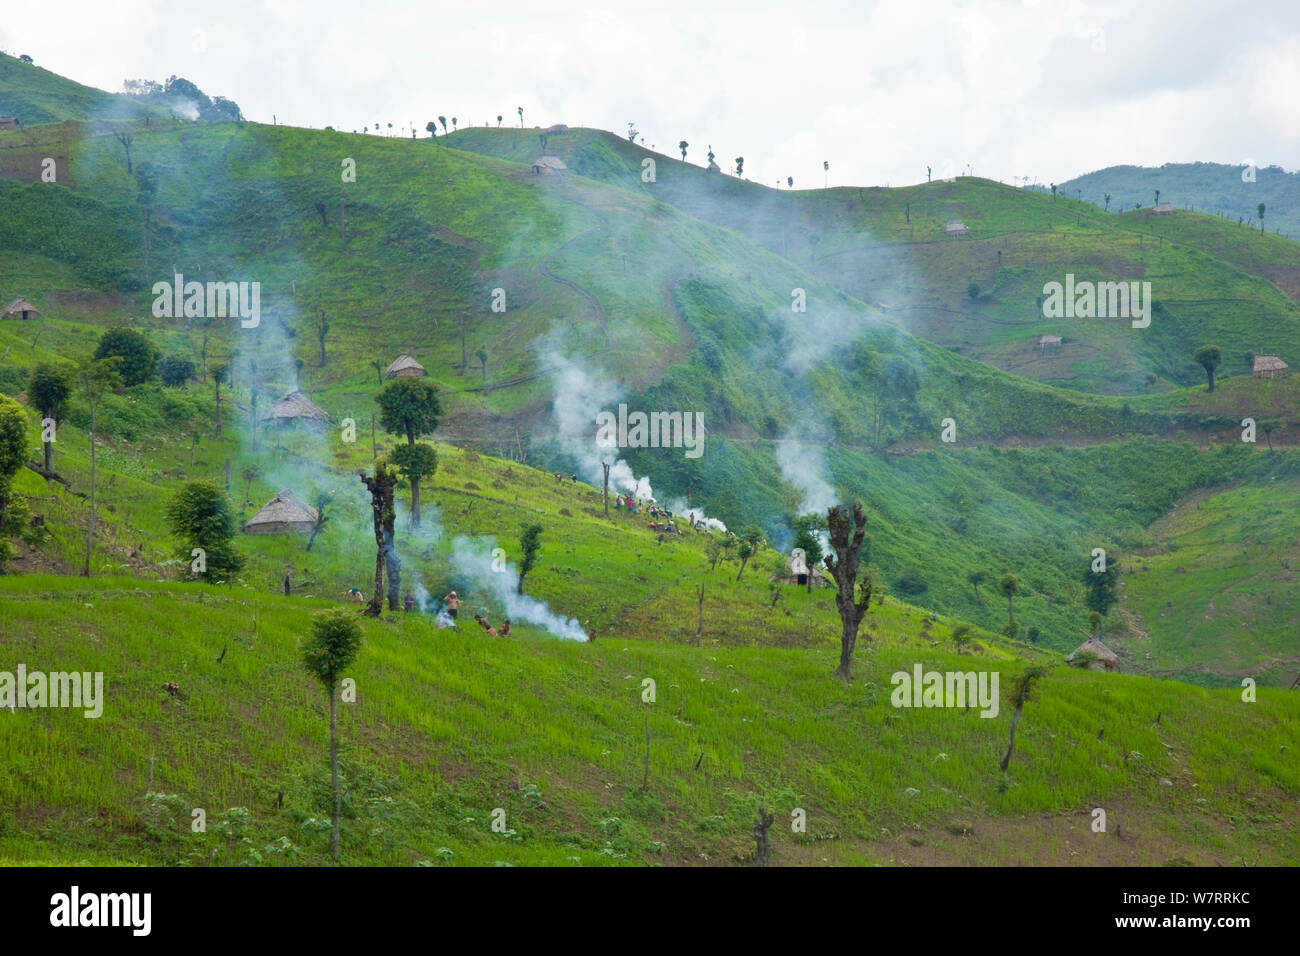 Deforested hillside, cleared for agricultural use, Arunachal Pradesh, India, 2008. Stock Photo